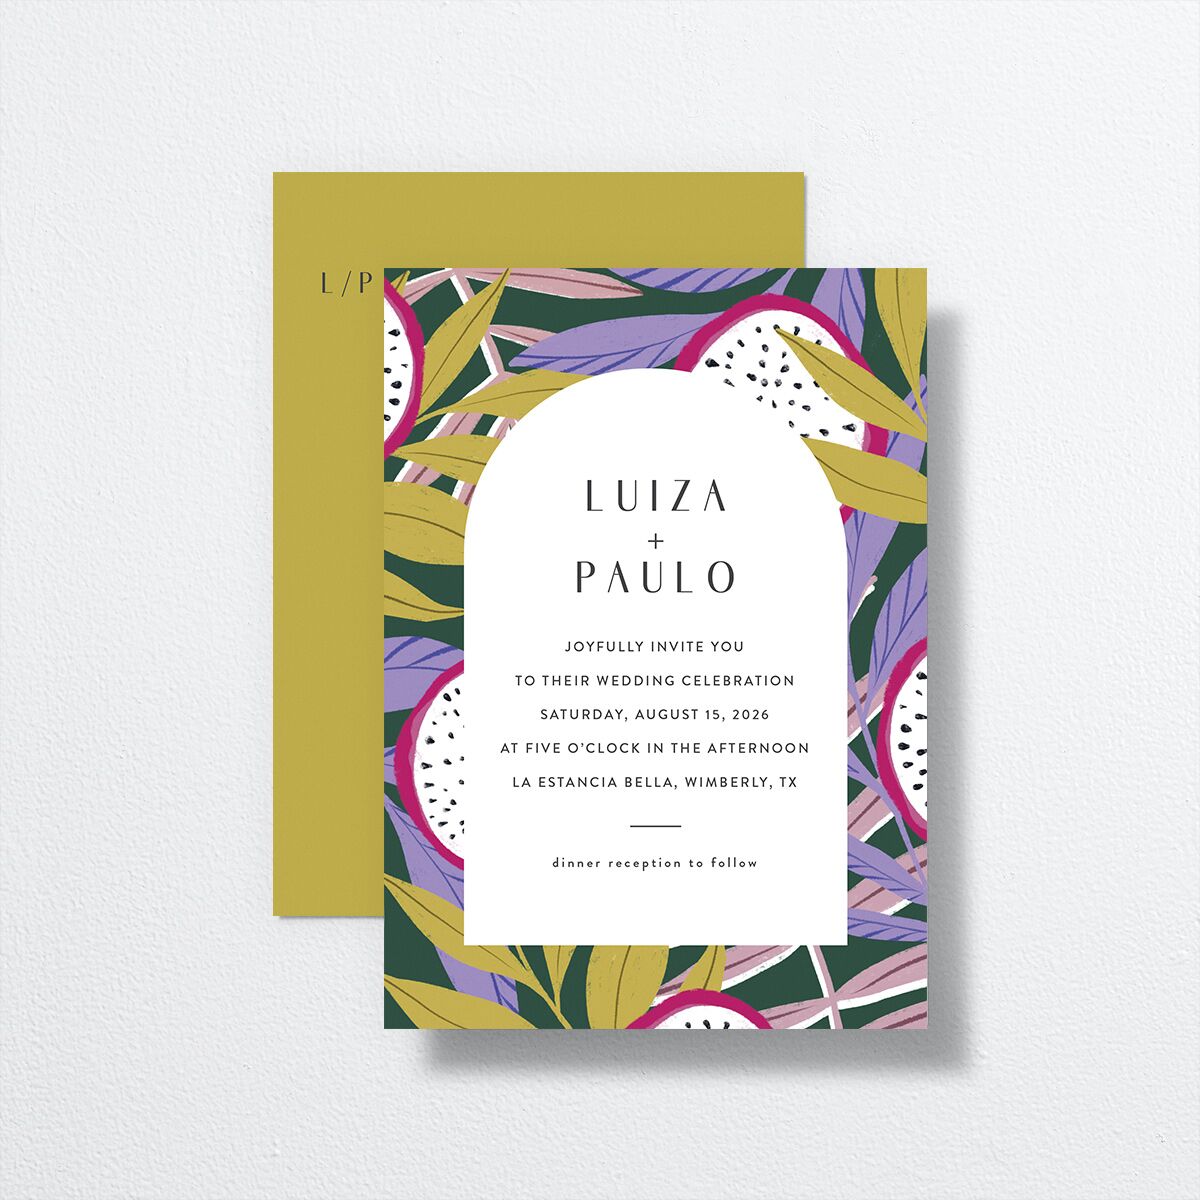 Vibrant Rio Wedding Invitations front-and-back in Green